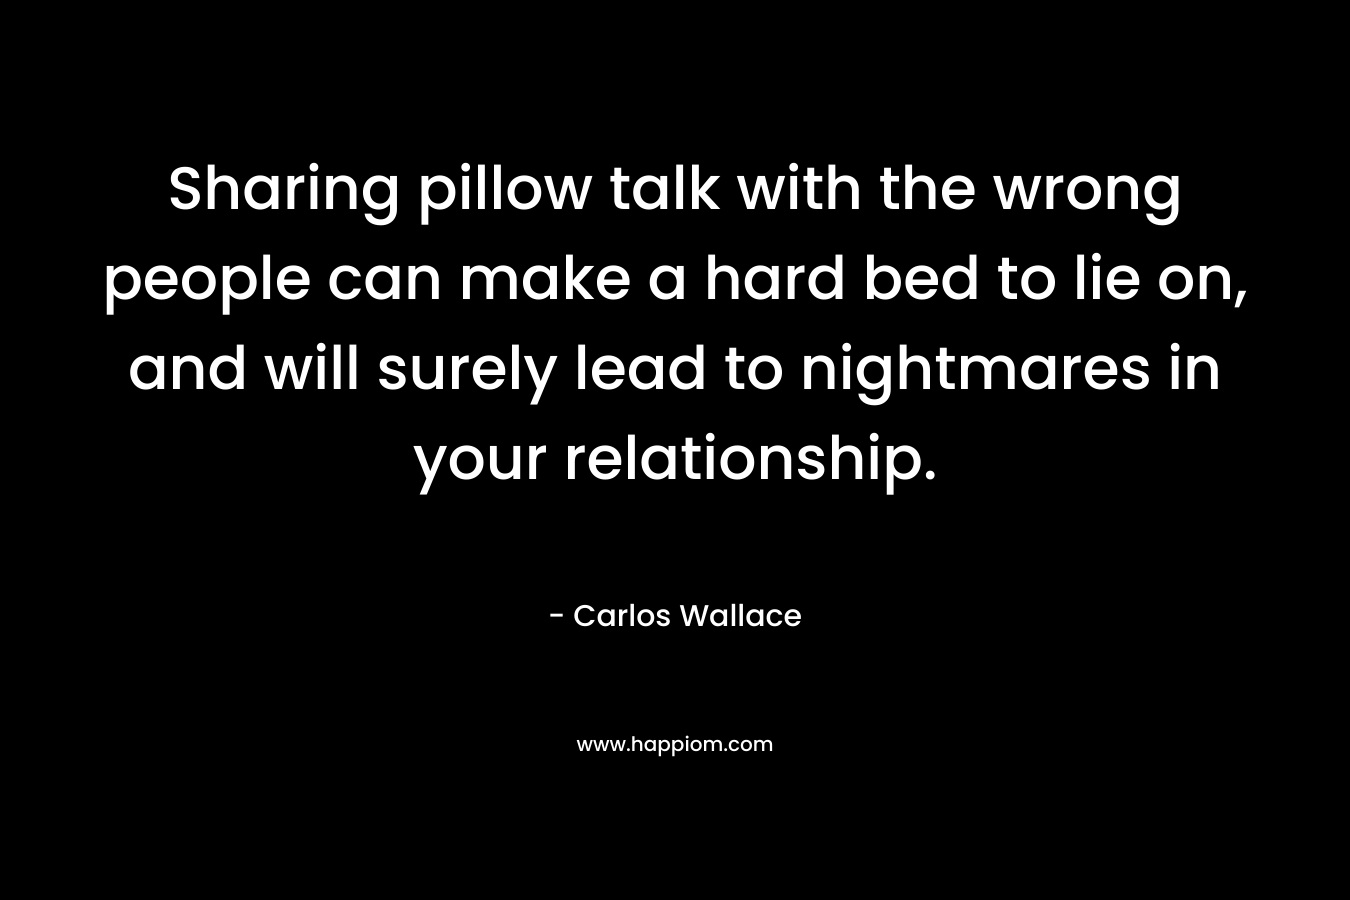 Sharing pillow talk with the wrong people can make a hard bed to lie on, and will surely lead to nightmares in your relationship. – Carlos Wallace